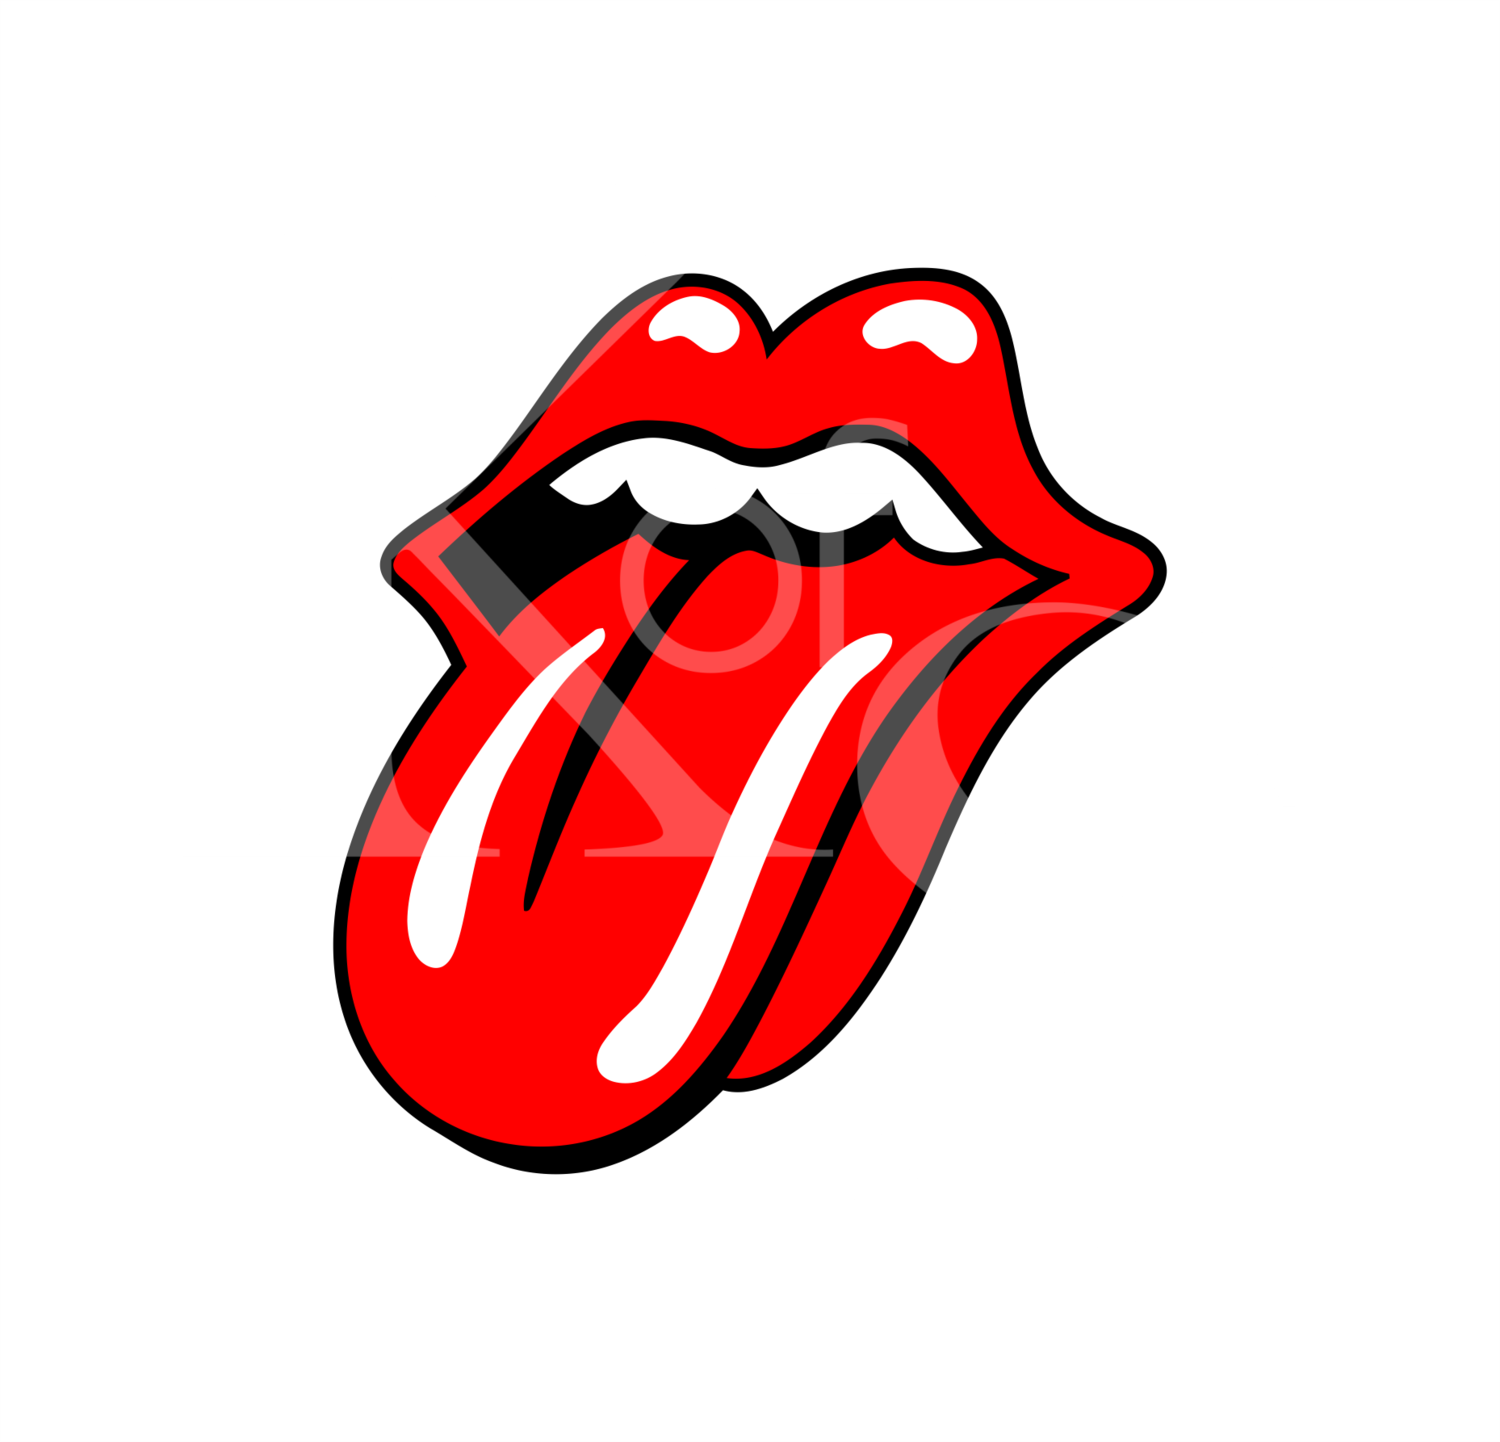 Luscious Lips with Tongue SVG, Tongue SVG, DXF, Tongue and Lips, Cut File, Lips Cut File, Iron On, Stones Svg, Cute Lips